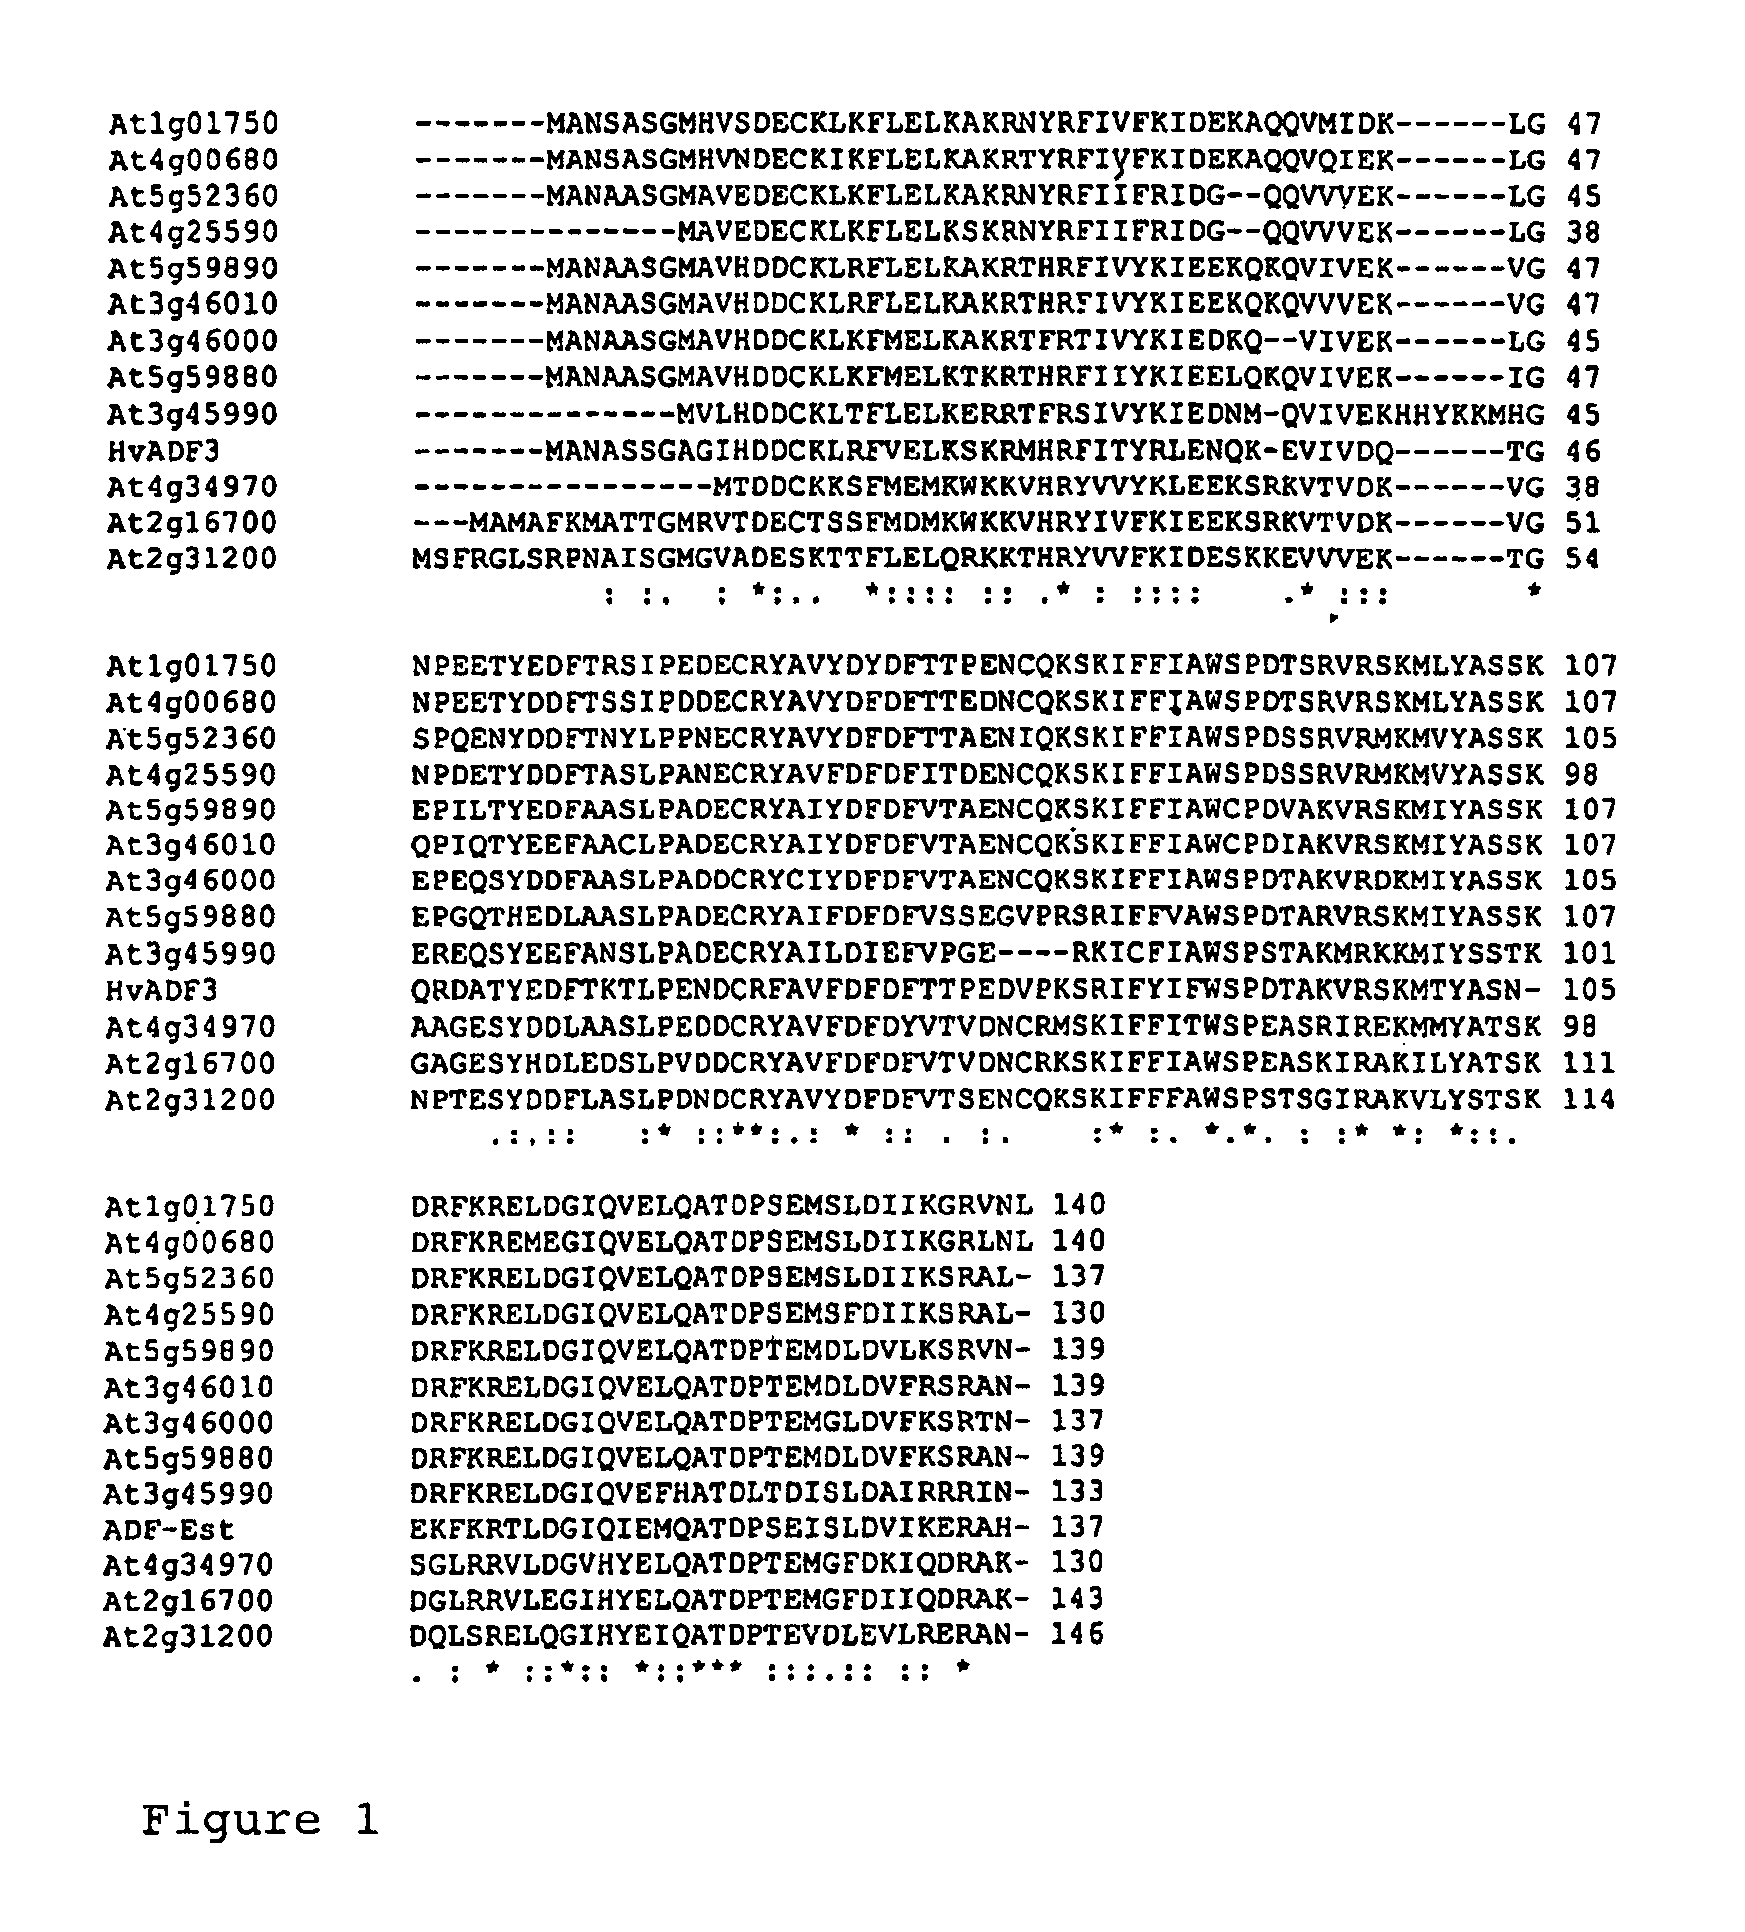 Method for production of transgenic plants with increased pathogenic resistance by altering the content and/or activity of actin-depolymerising factors